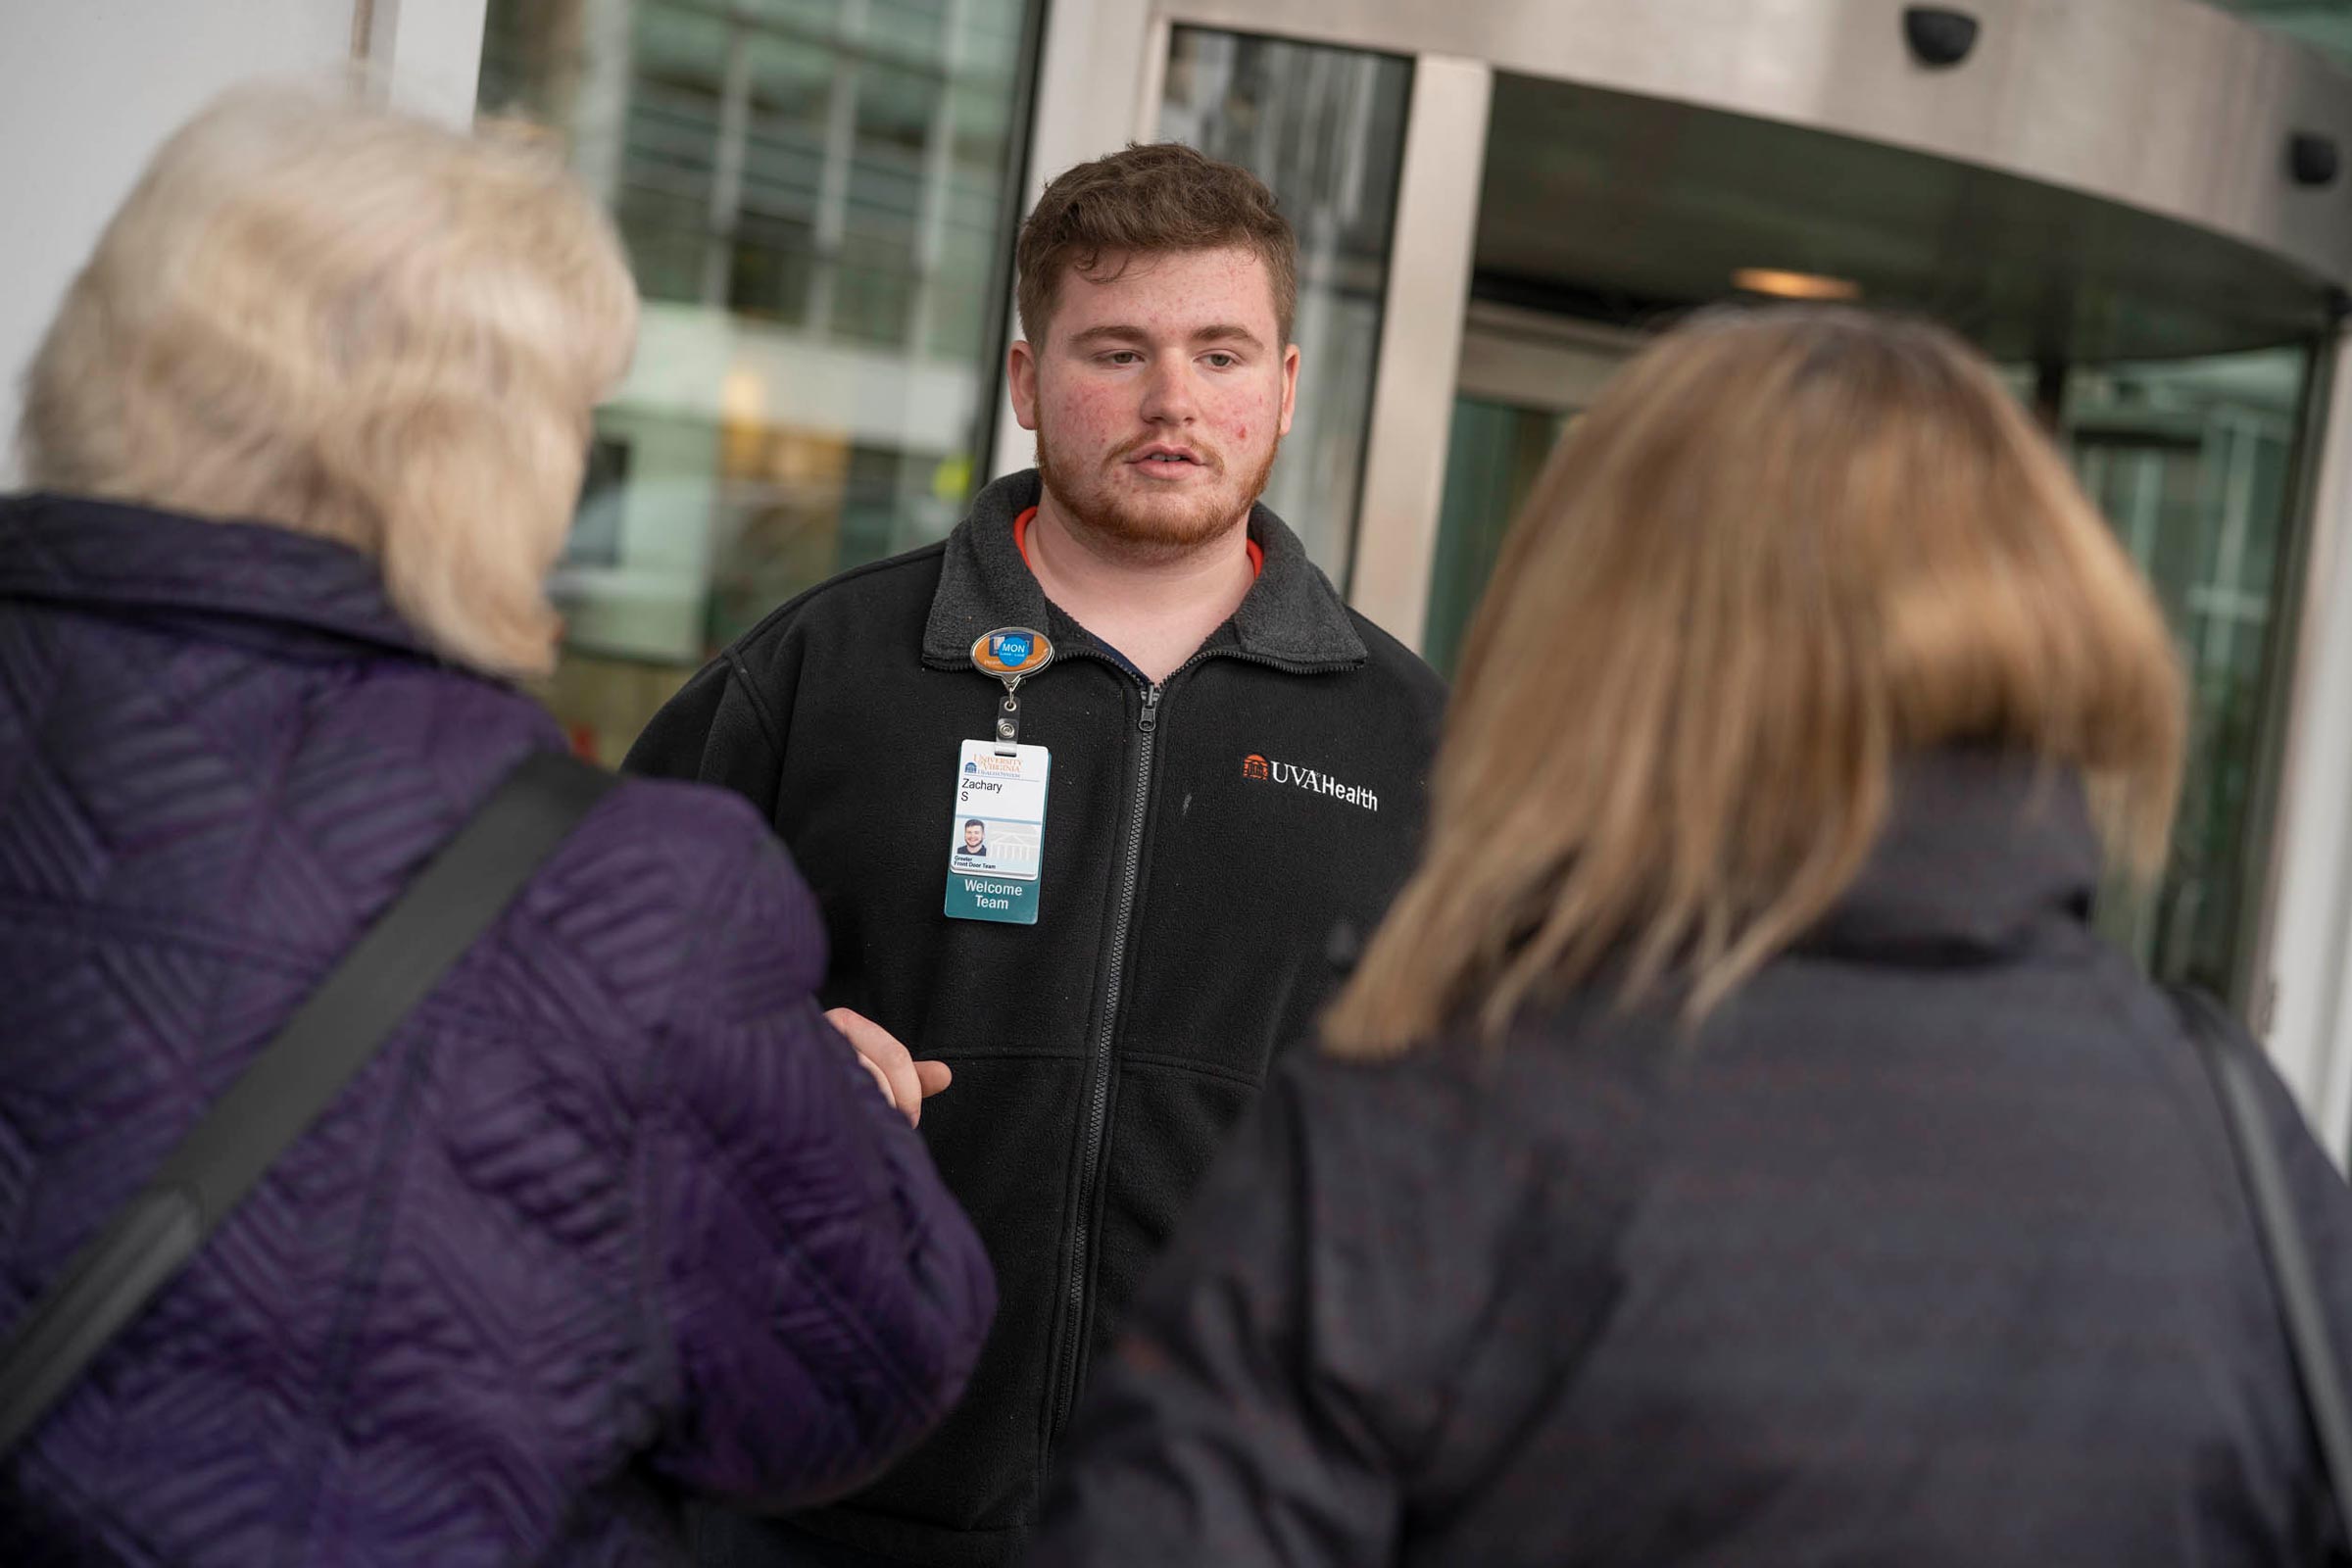 UVA Health member talking to people before entering the Hospital